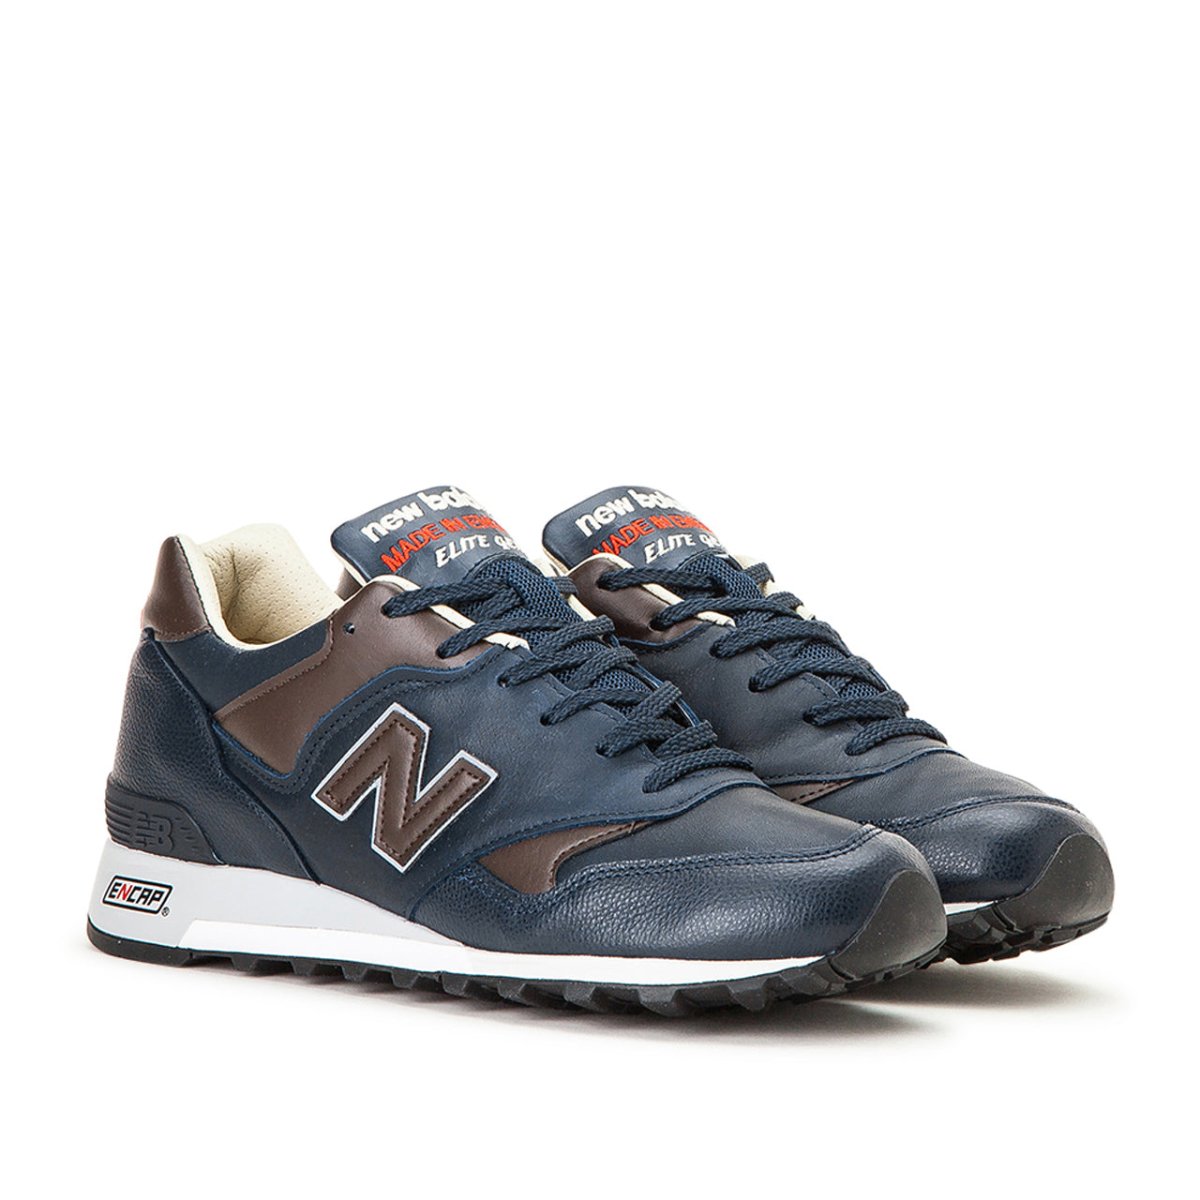 New Balance M577 GNB 'Elite Gent - Made in England' (Navy)  - Allike Store